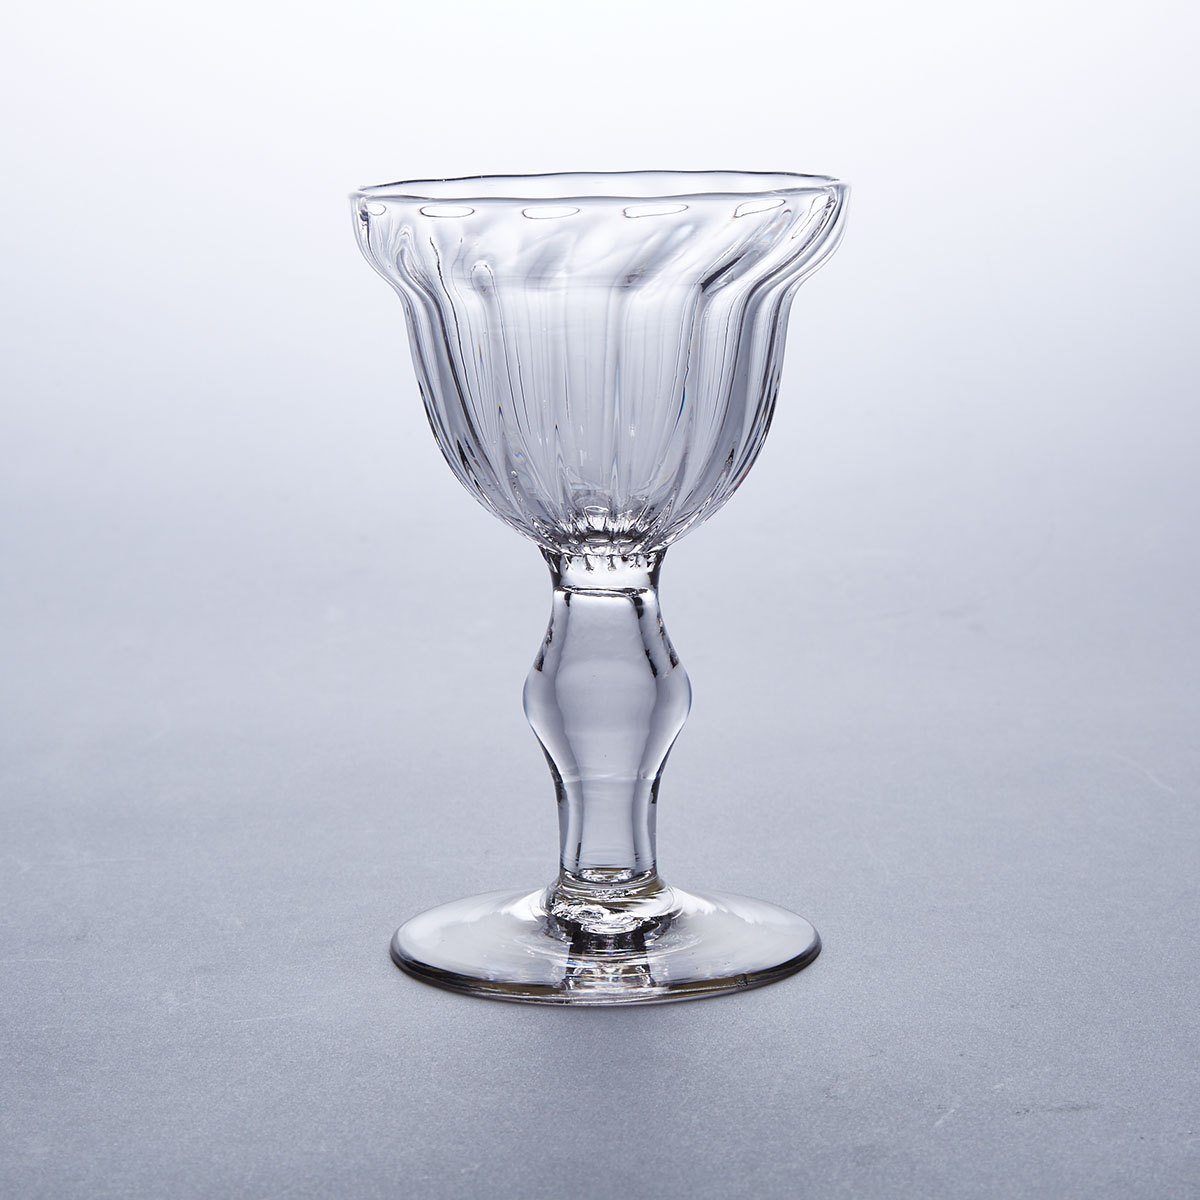 English Hollow Knopped Stemmed Sweetmeat or Champagne Glass, mid-18th century